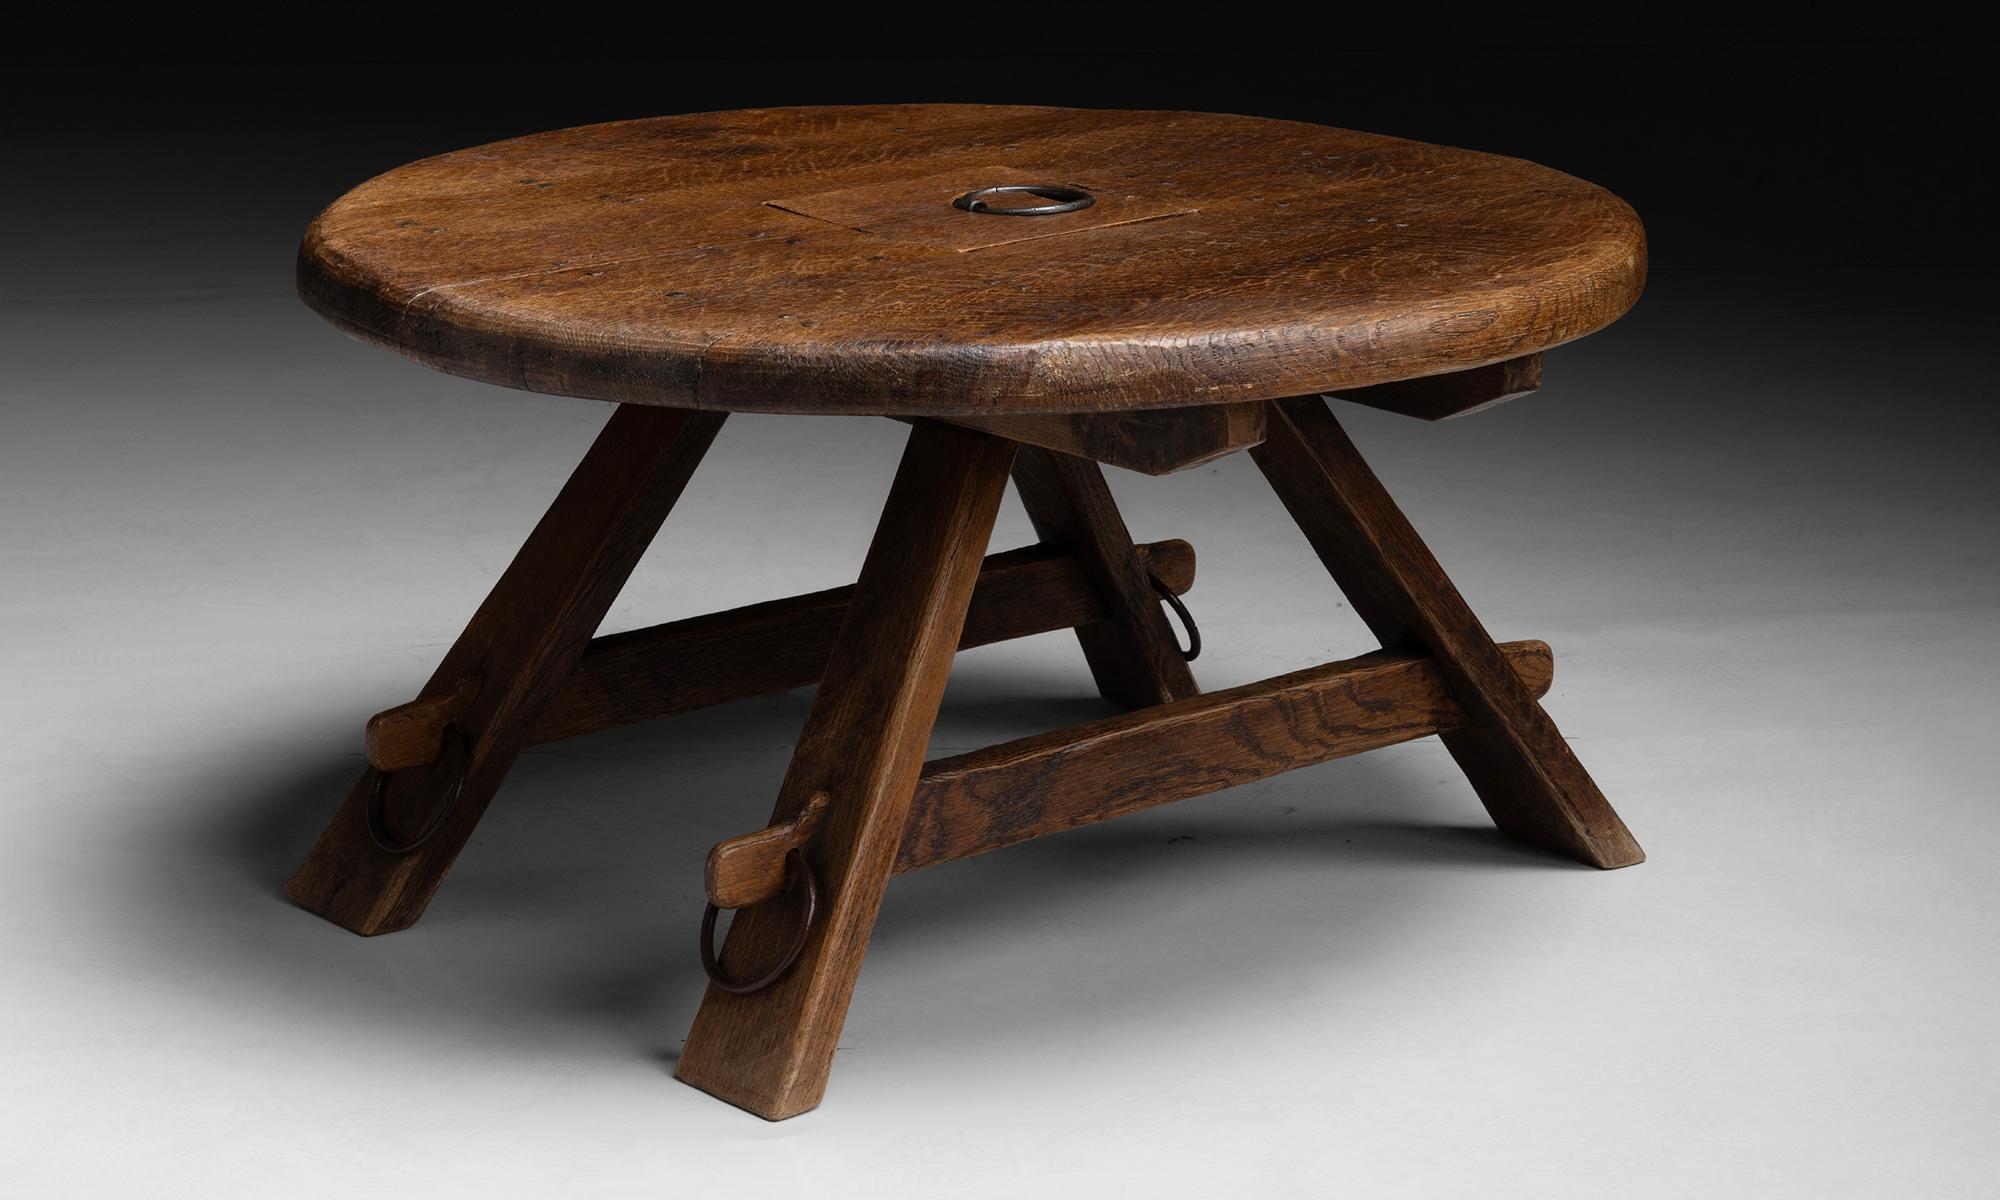 Gouged Oak Coffee Table

France circa 1970

With circular top, small storage compartment and iron details.

35.5”dia x 18.75”h